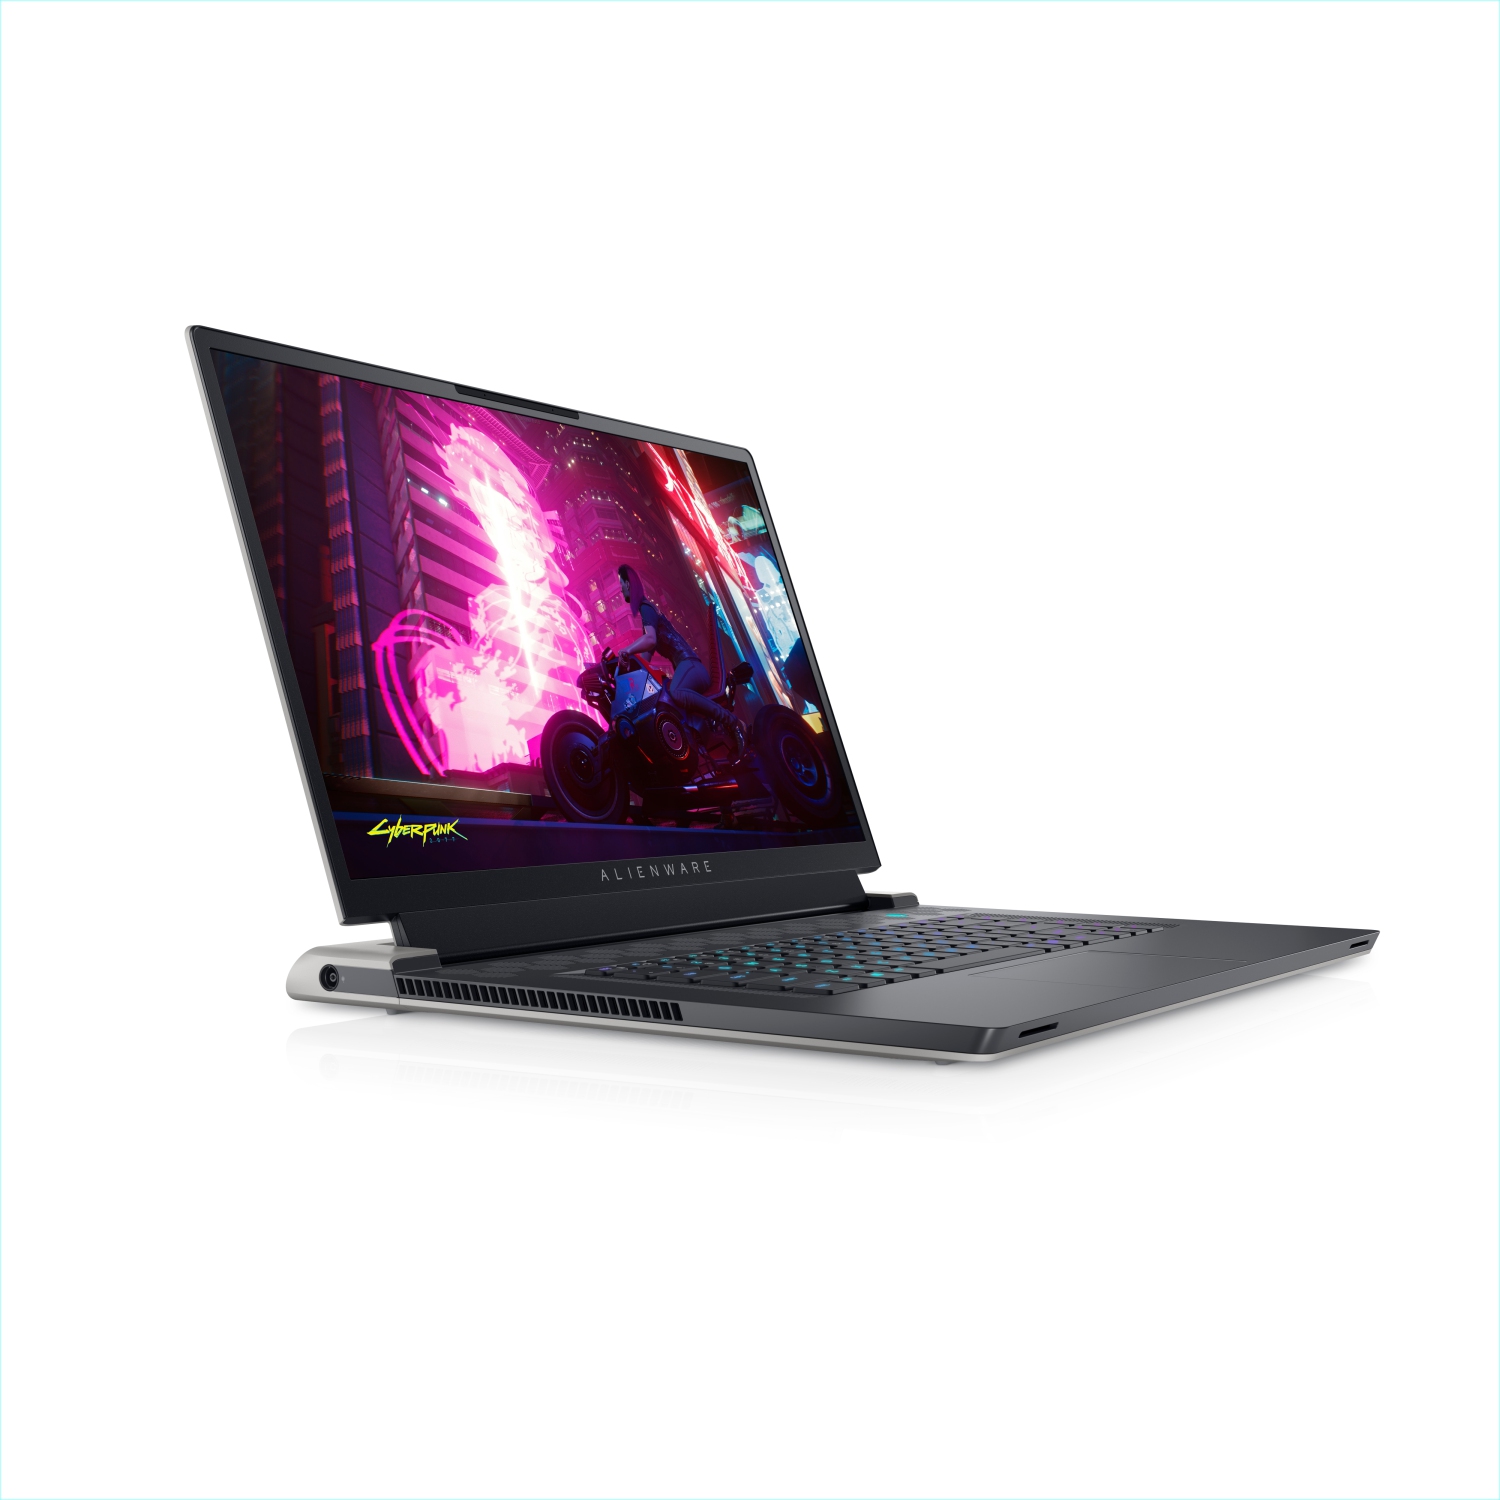 Refurbished (Excellent) - Dell Alienware X17 R1 Gaming Laptop (2021), 17.3" FHD, Core i7, 1TB SSD + 512GB SSD, 64GB RAM, RTX 3080, 4.6 GHz, 11th Gen CPU Certified